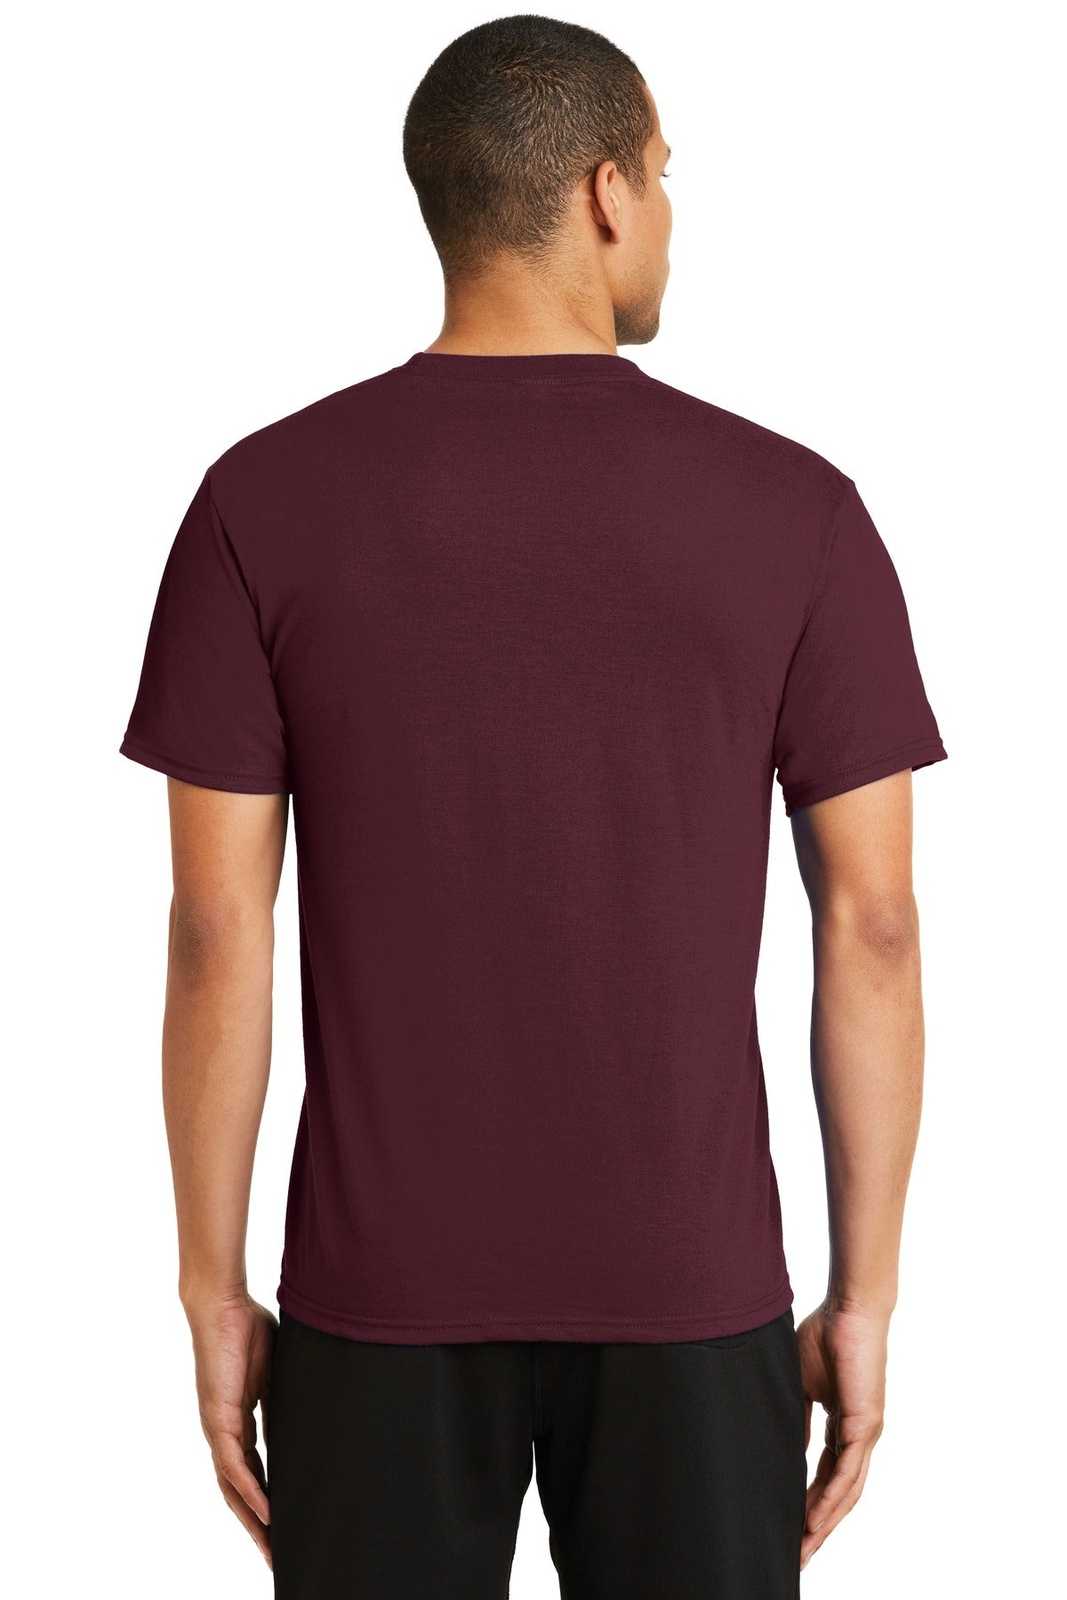 Port & Company PC381 Performance Blend Tee - Athletic Maroon - HIT a Double - 1